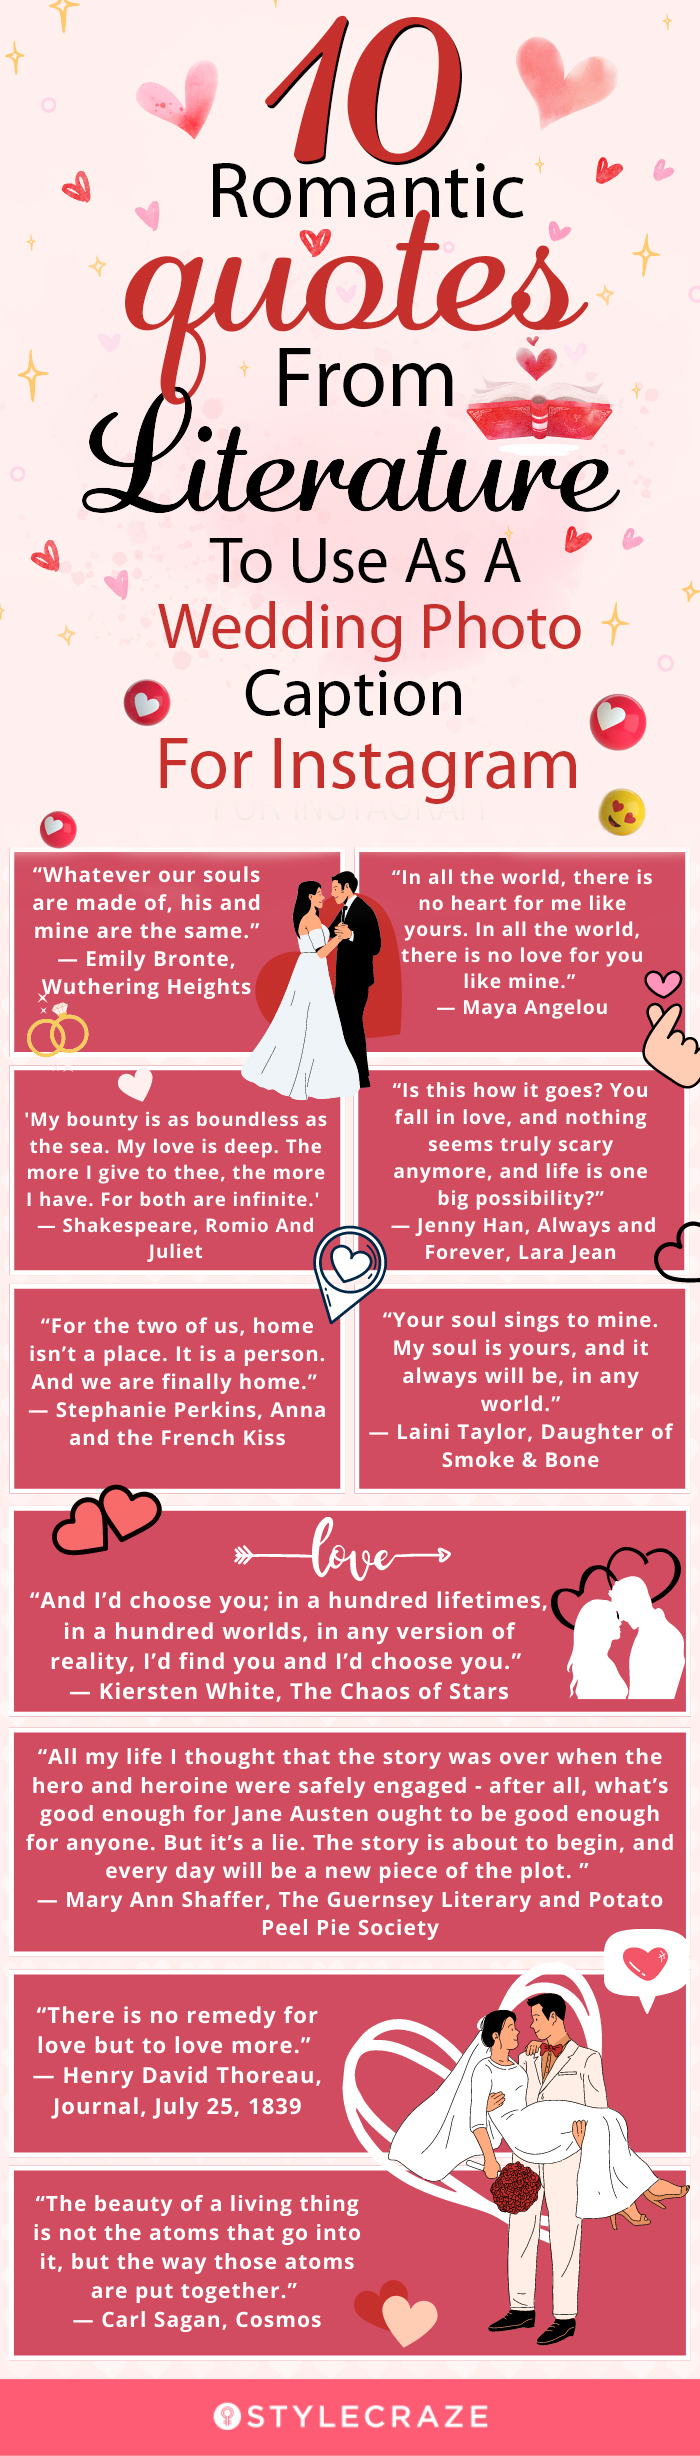 romantic quotes from literature to use as a wedding photo caption for instagram [infographic]